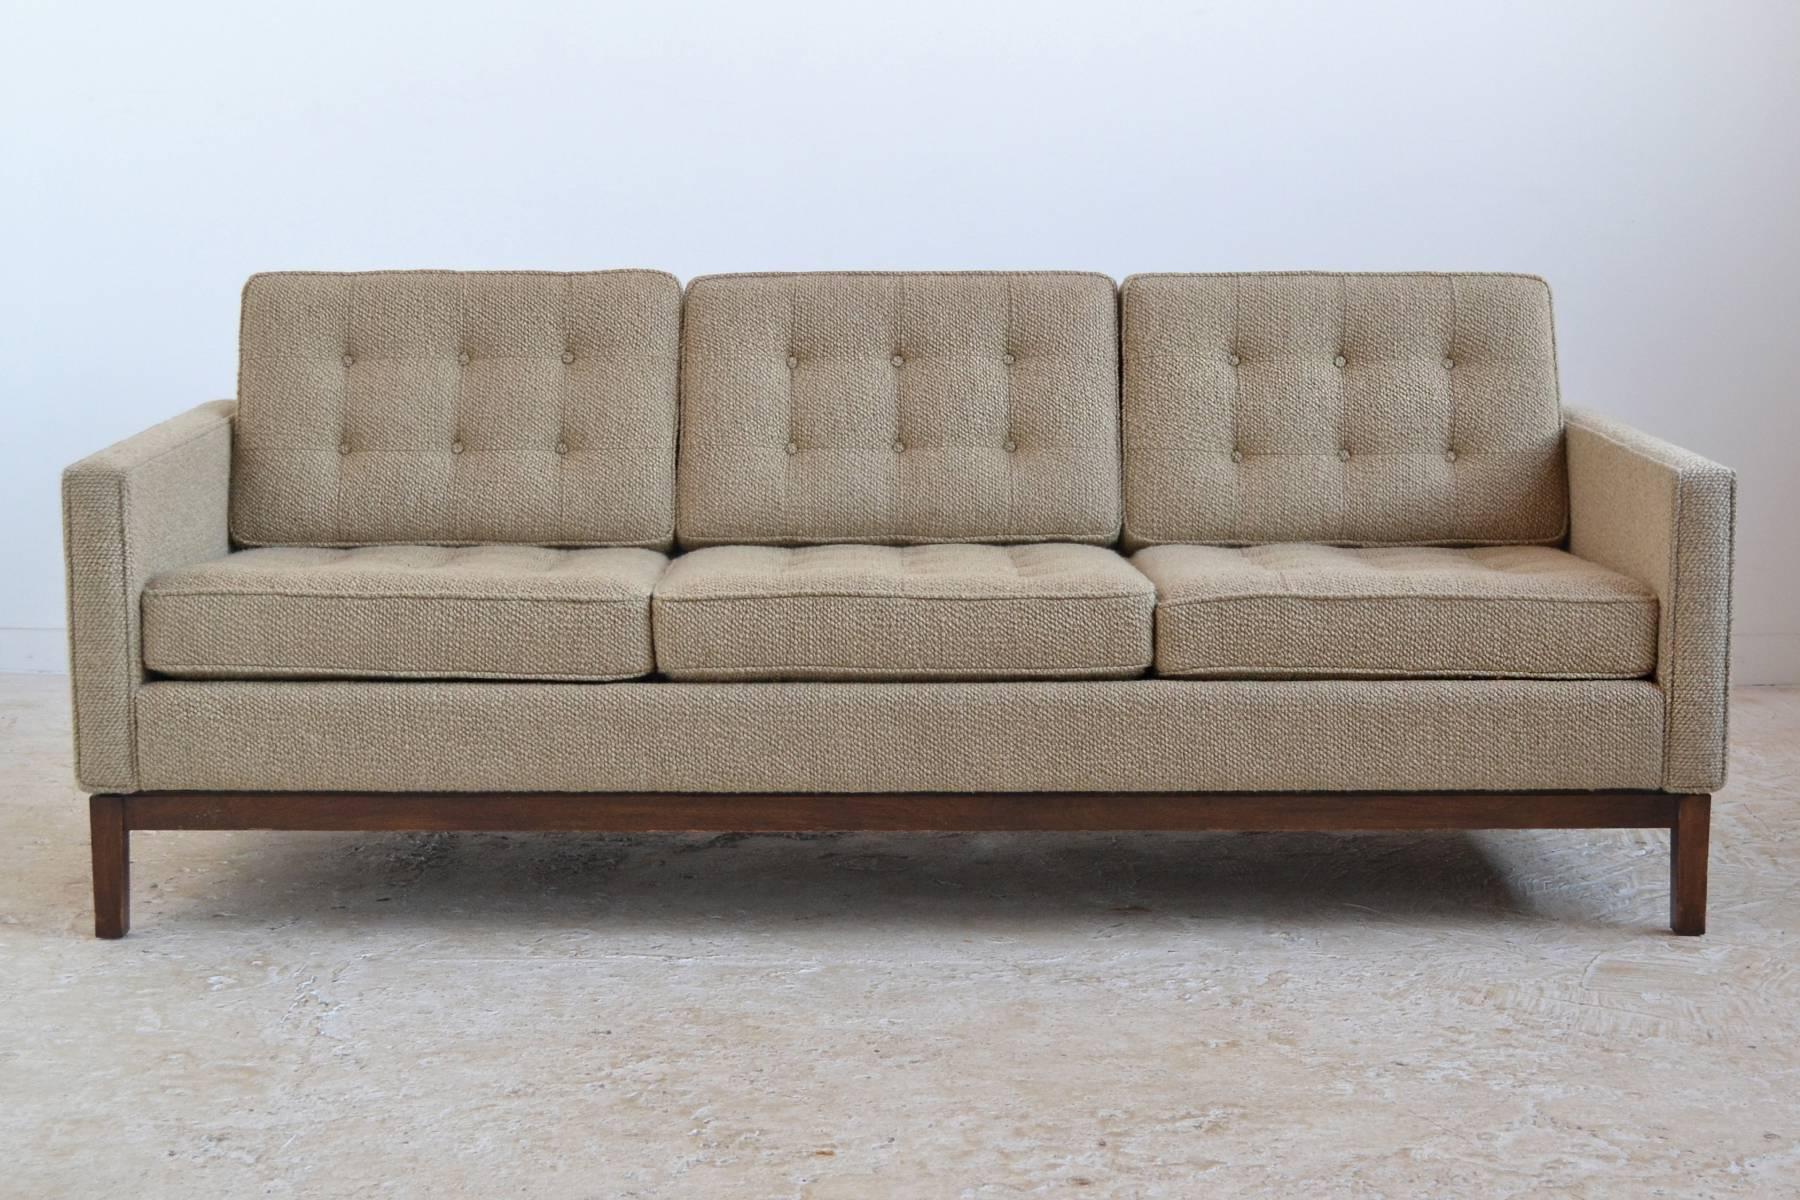 American Florence Knoll Style Sofa by Steelcase